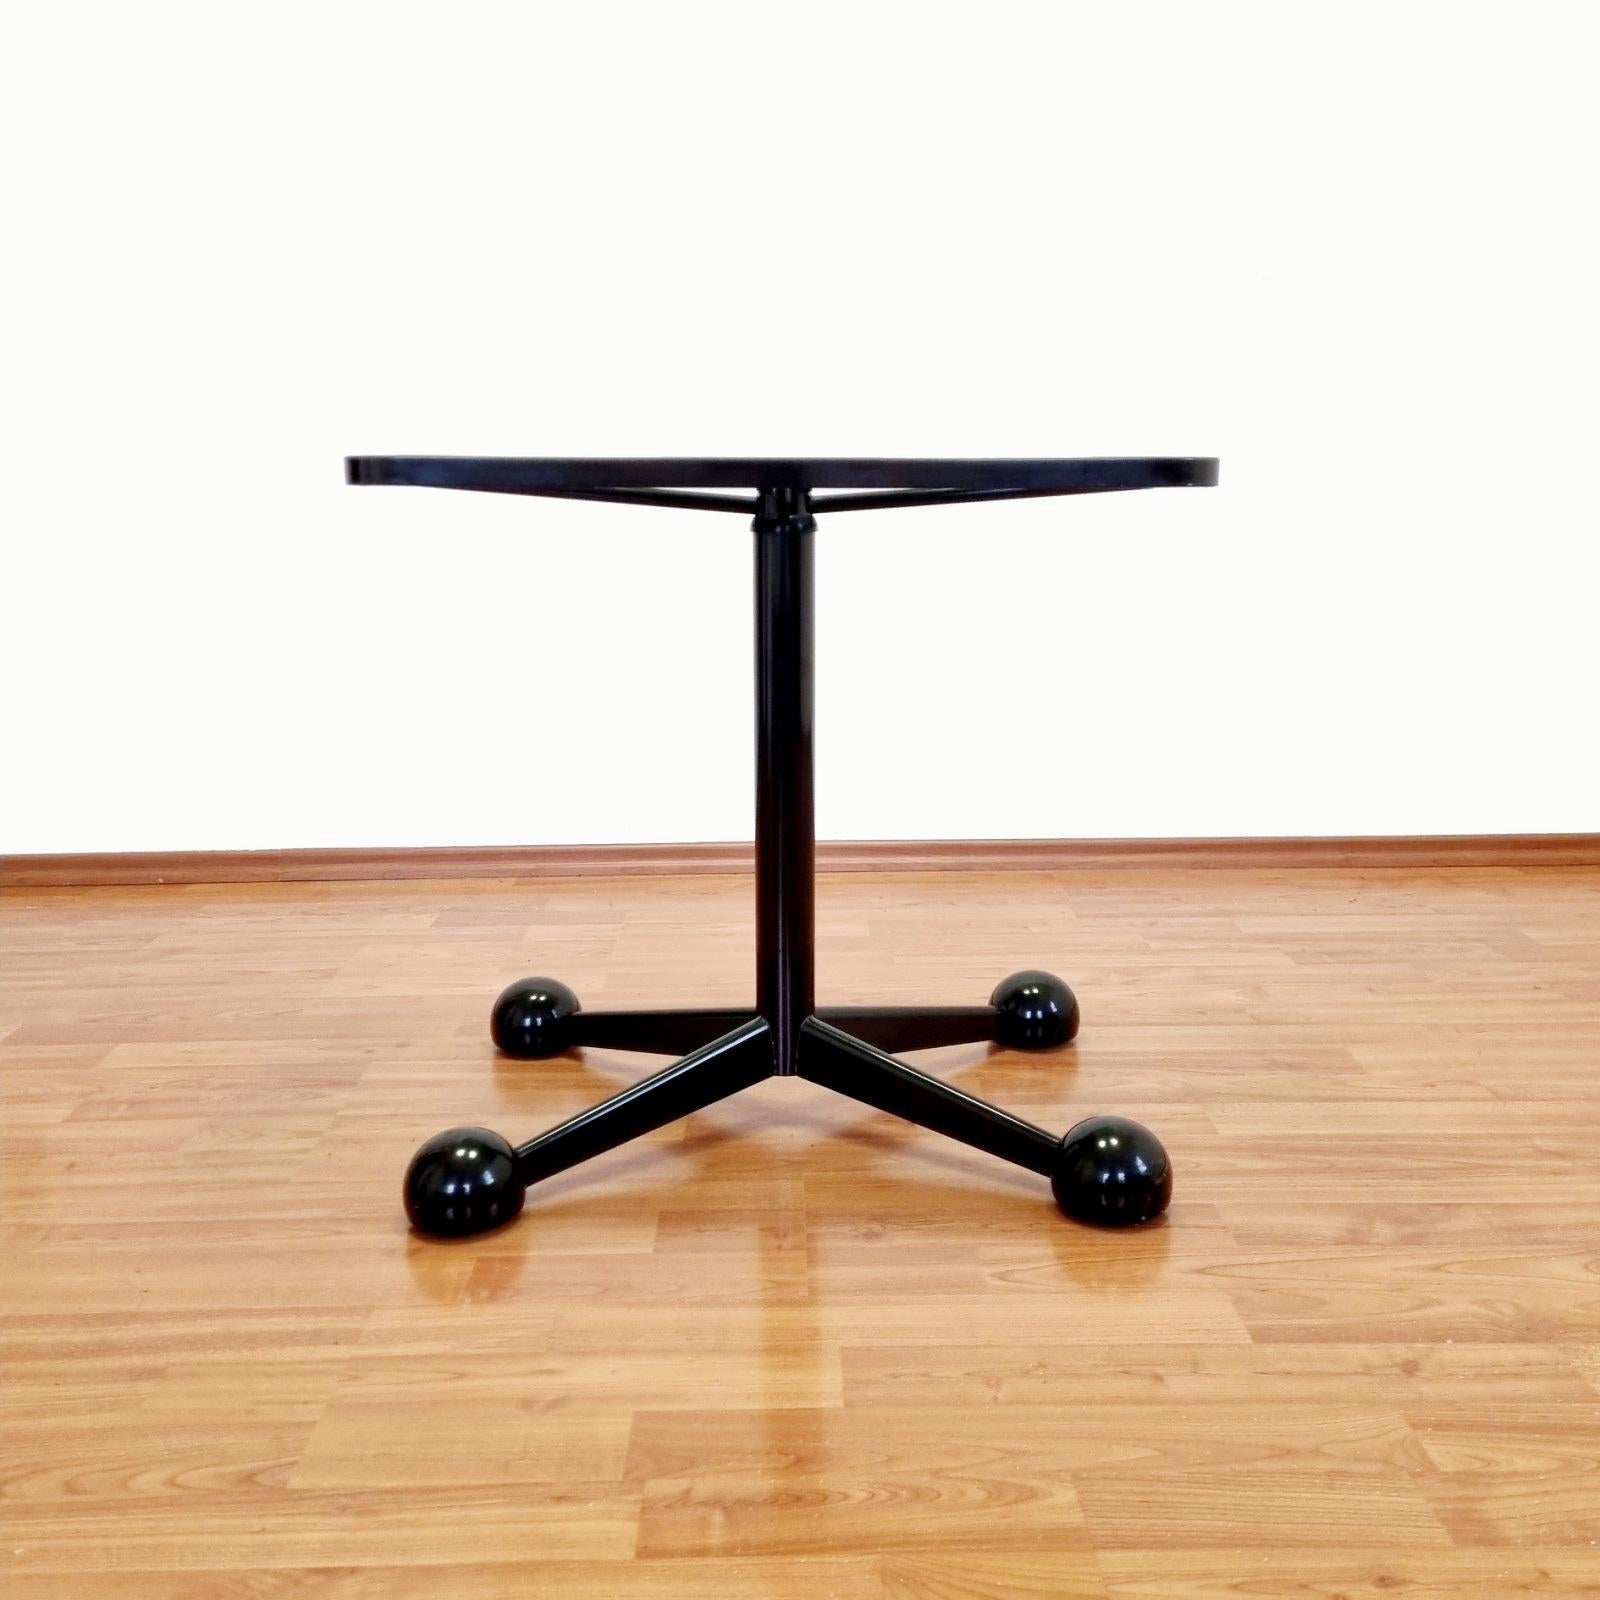 Italian Black Glass and Metal Side Table by Arredamenti Allegri Parma Italy 70s For Sale